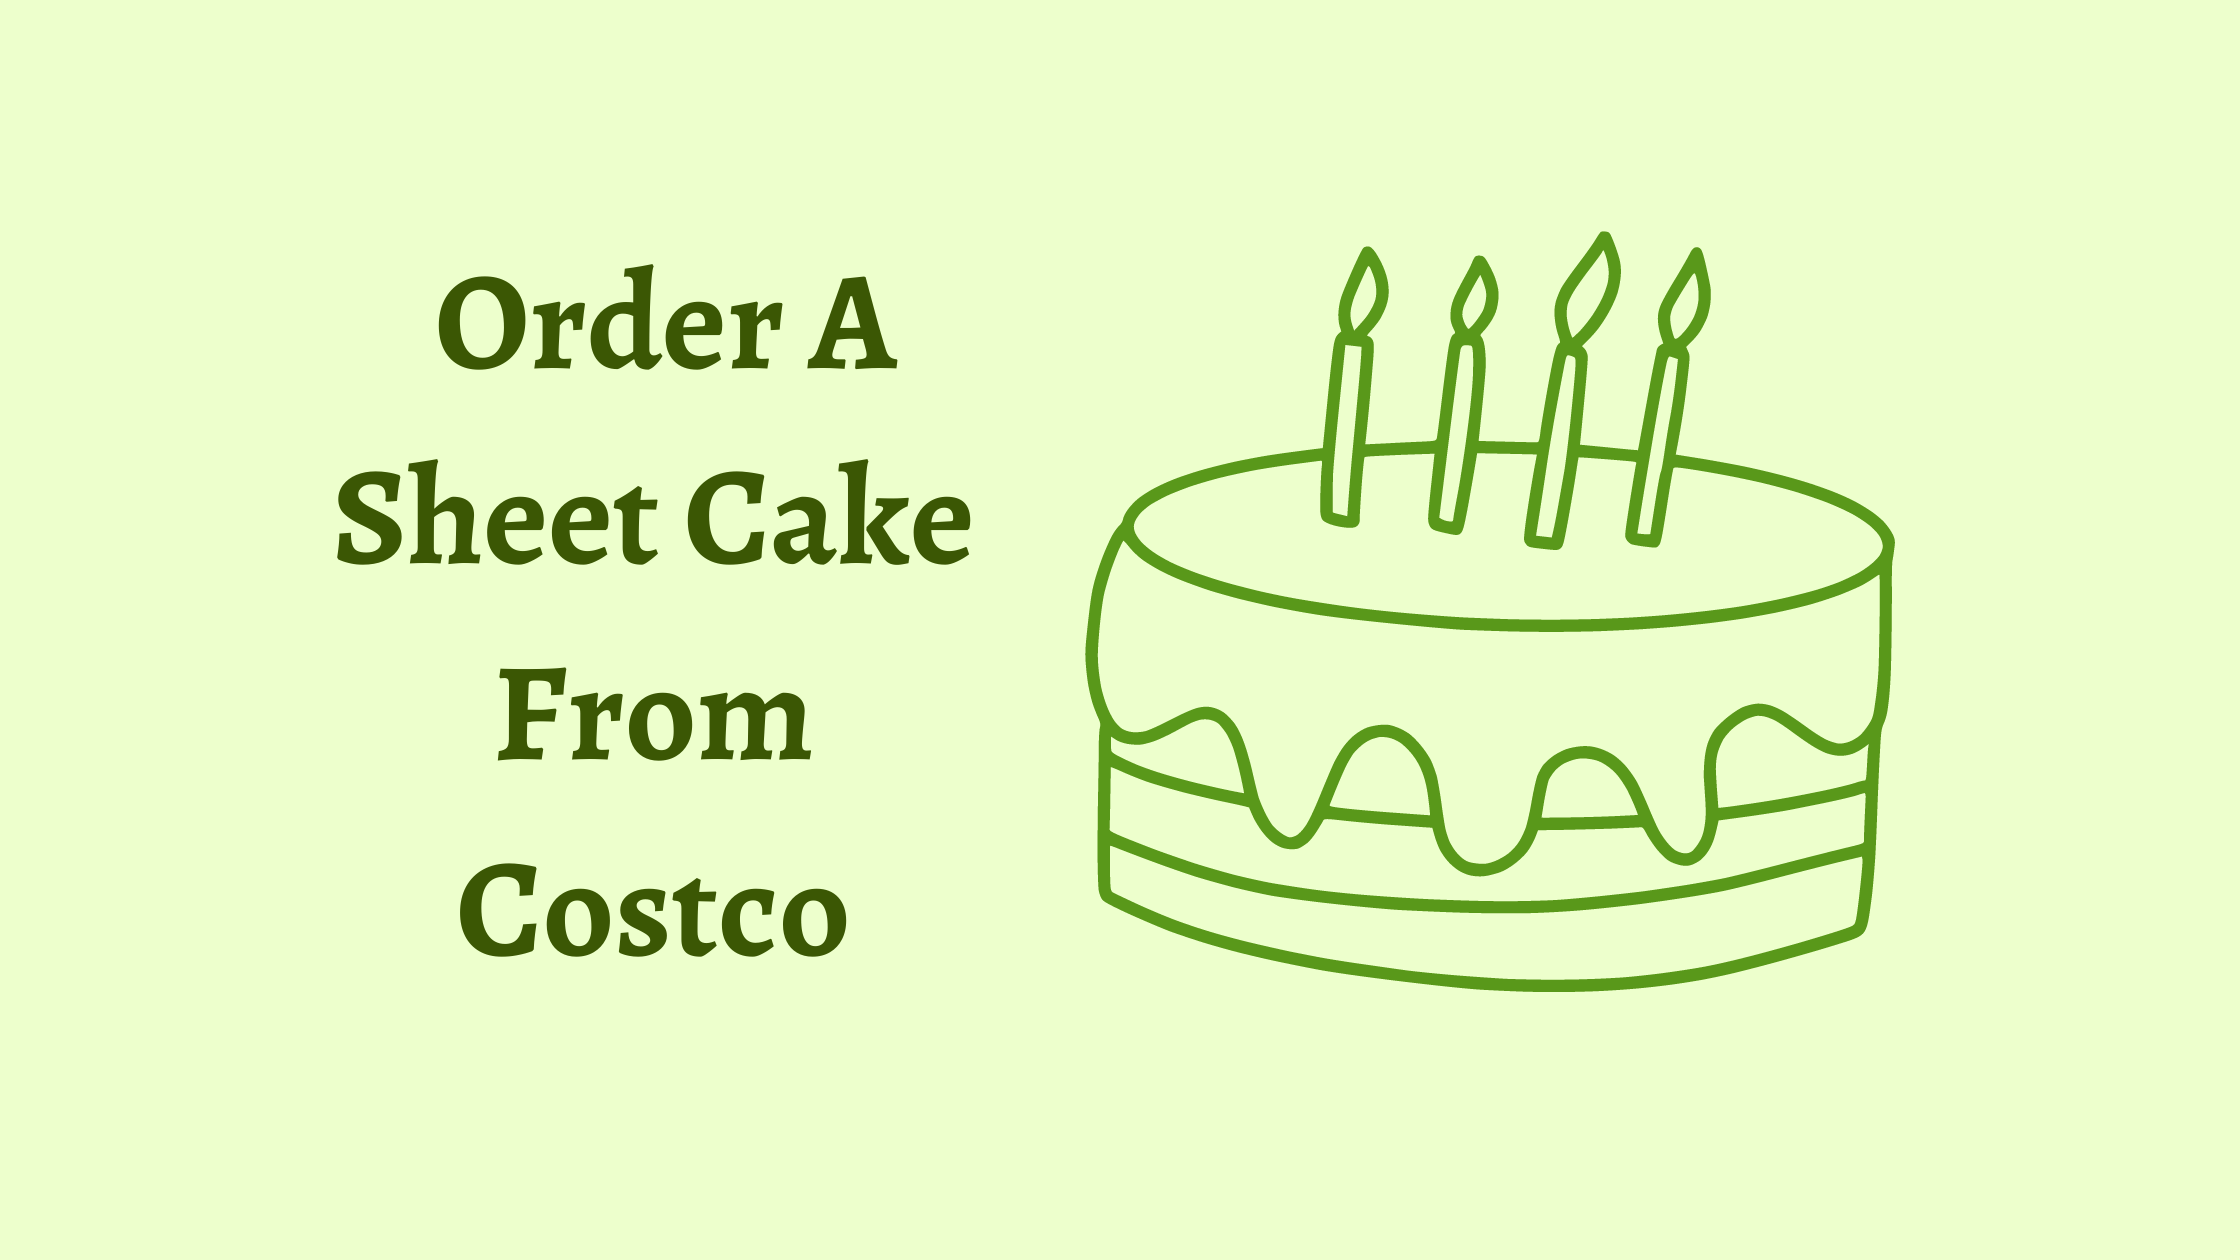 Order A Sheet Cake From Costco